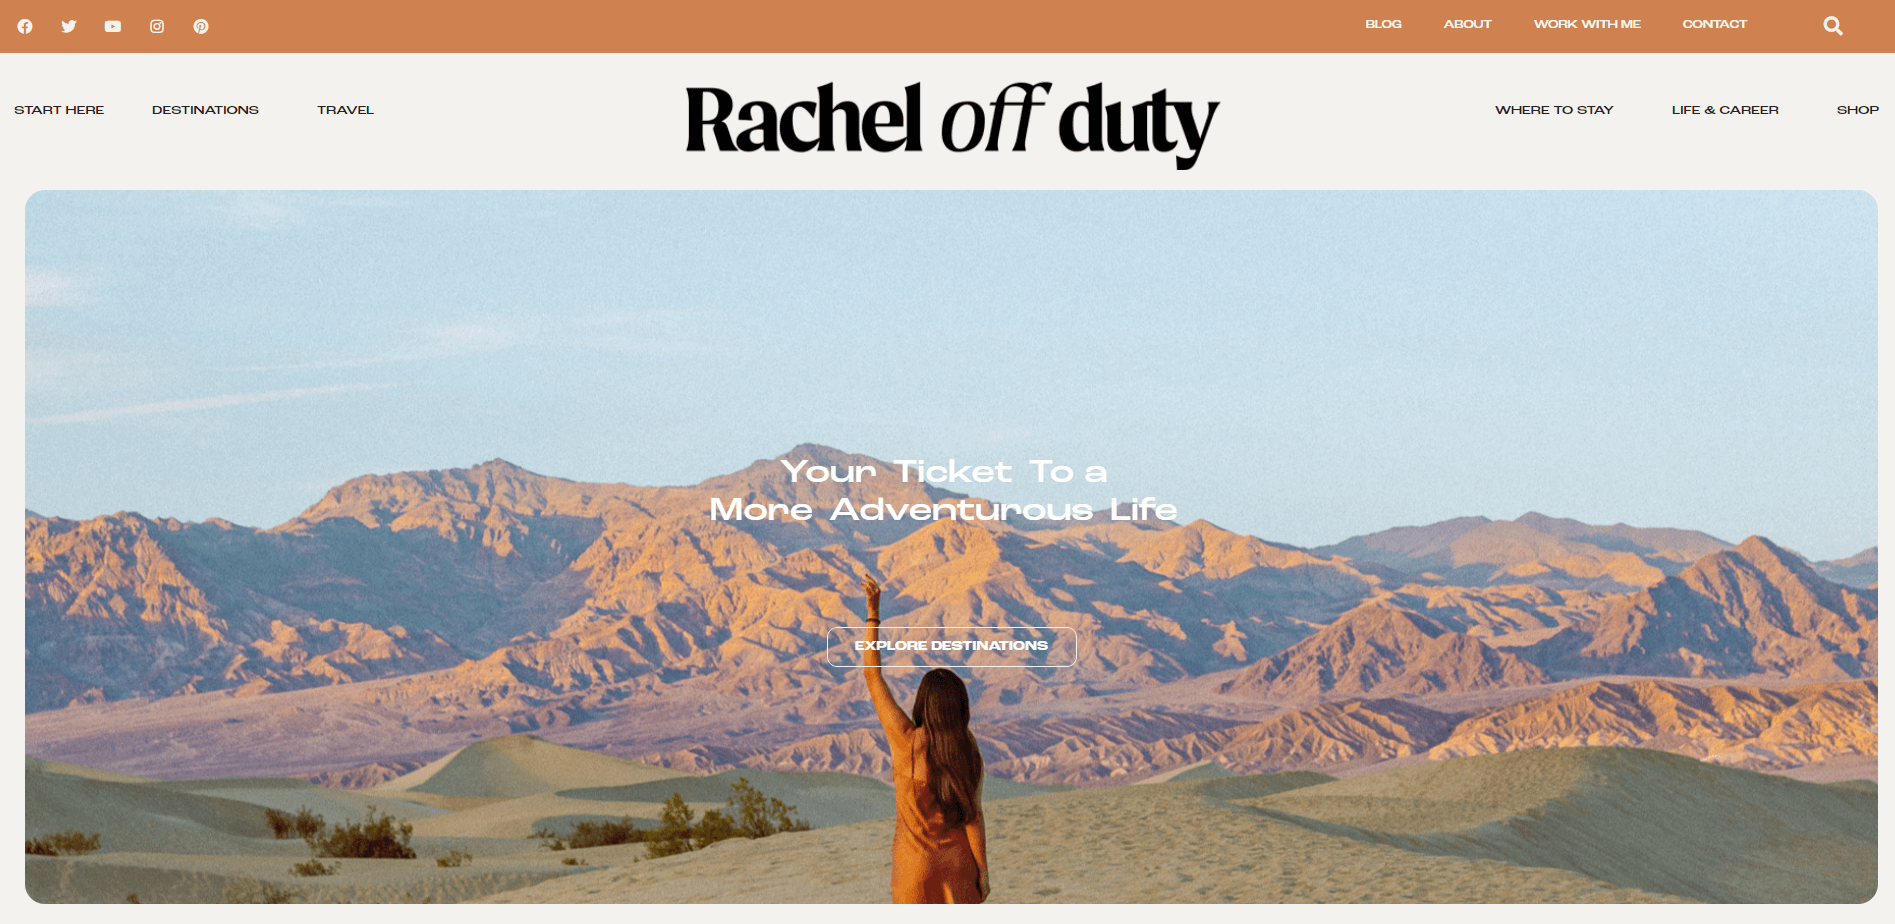 A website using muted browns and pinks in its color scheme. web design trends